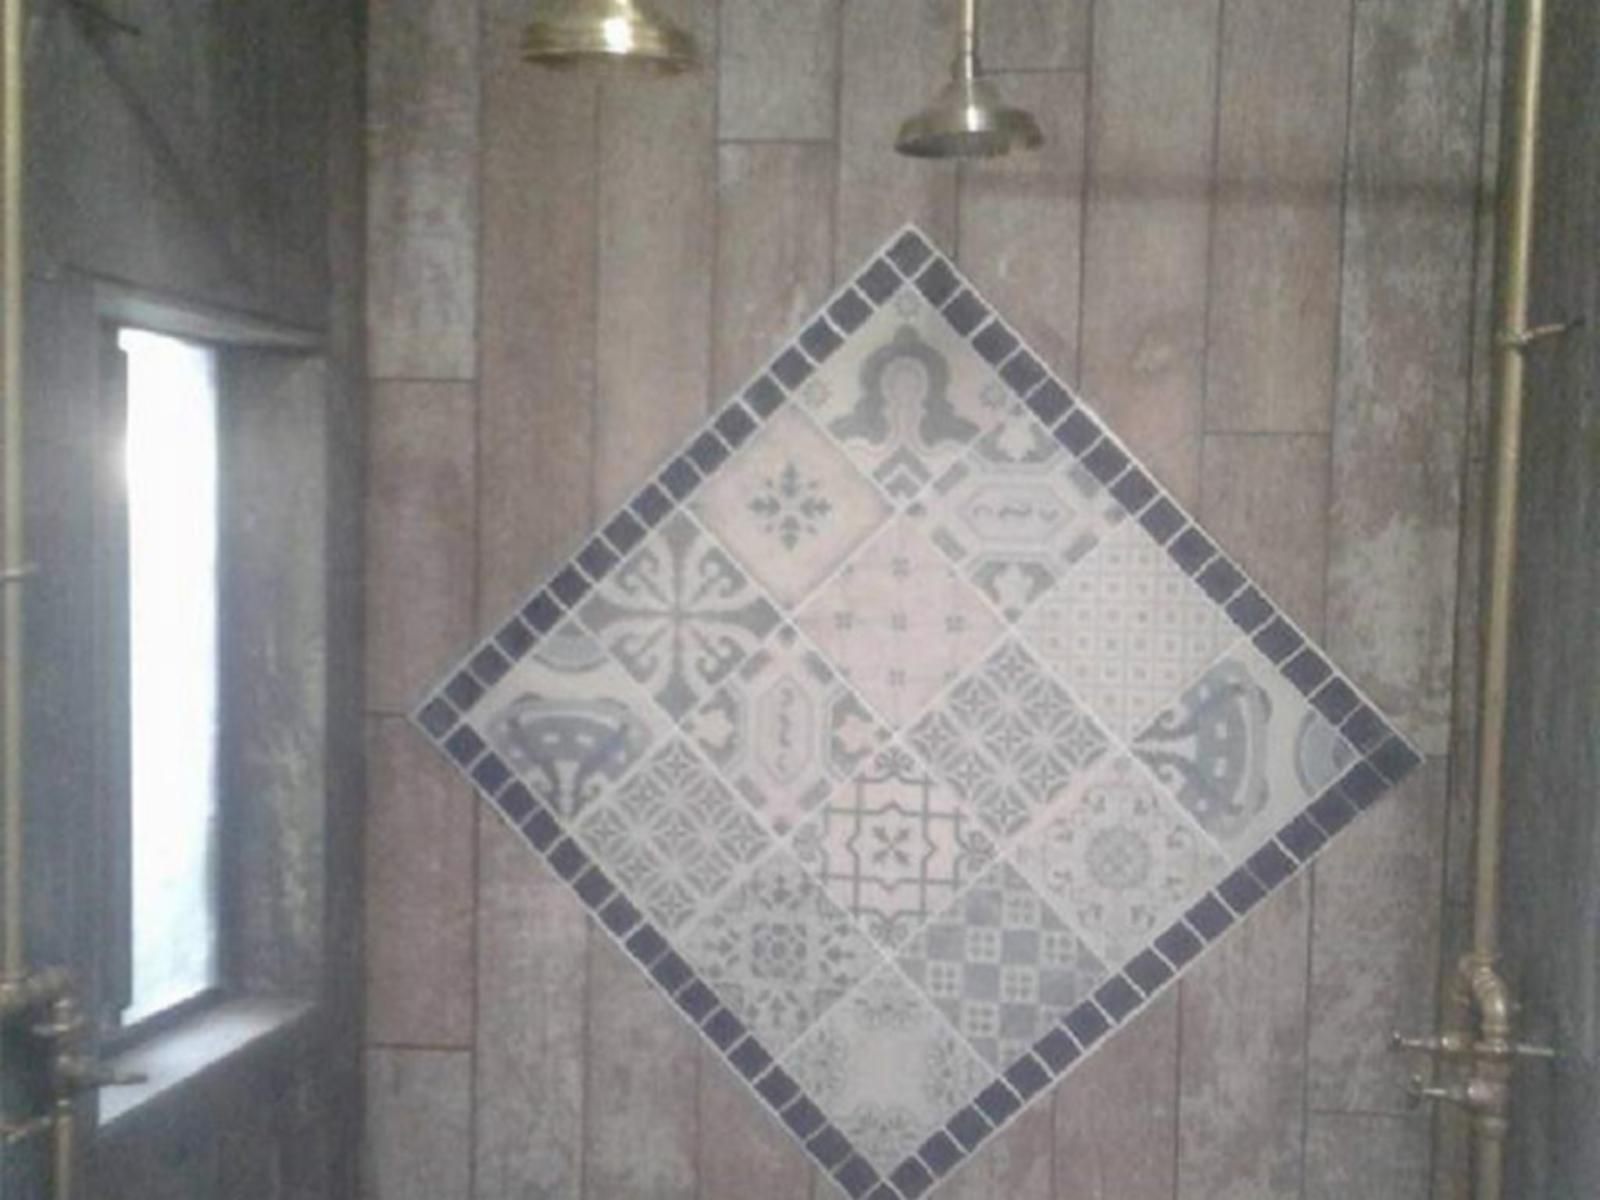 The Sabie Town House Guest Lodge Sabie Mpumalanga South Africa Colorless, Mosaic, Art, Bathroom, Symmetry